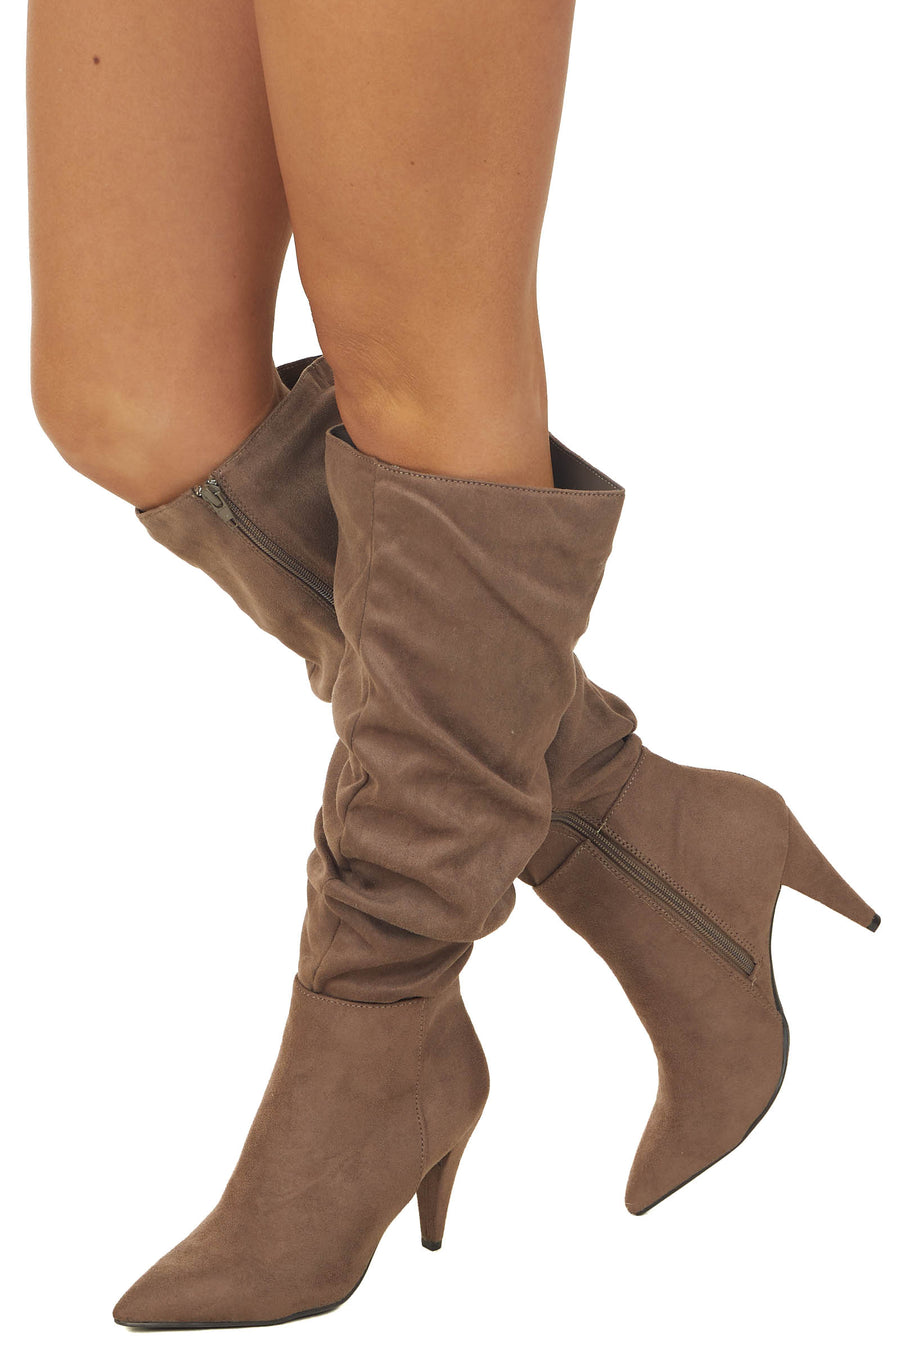 Coffee Slouchy Side Zip Up Pointed Heel Boots